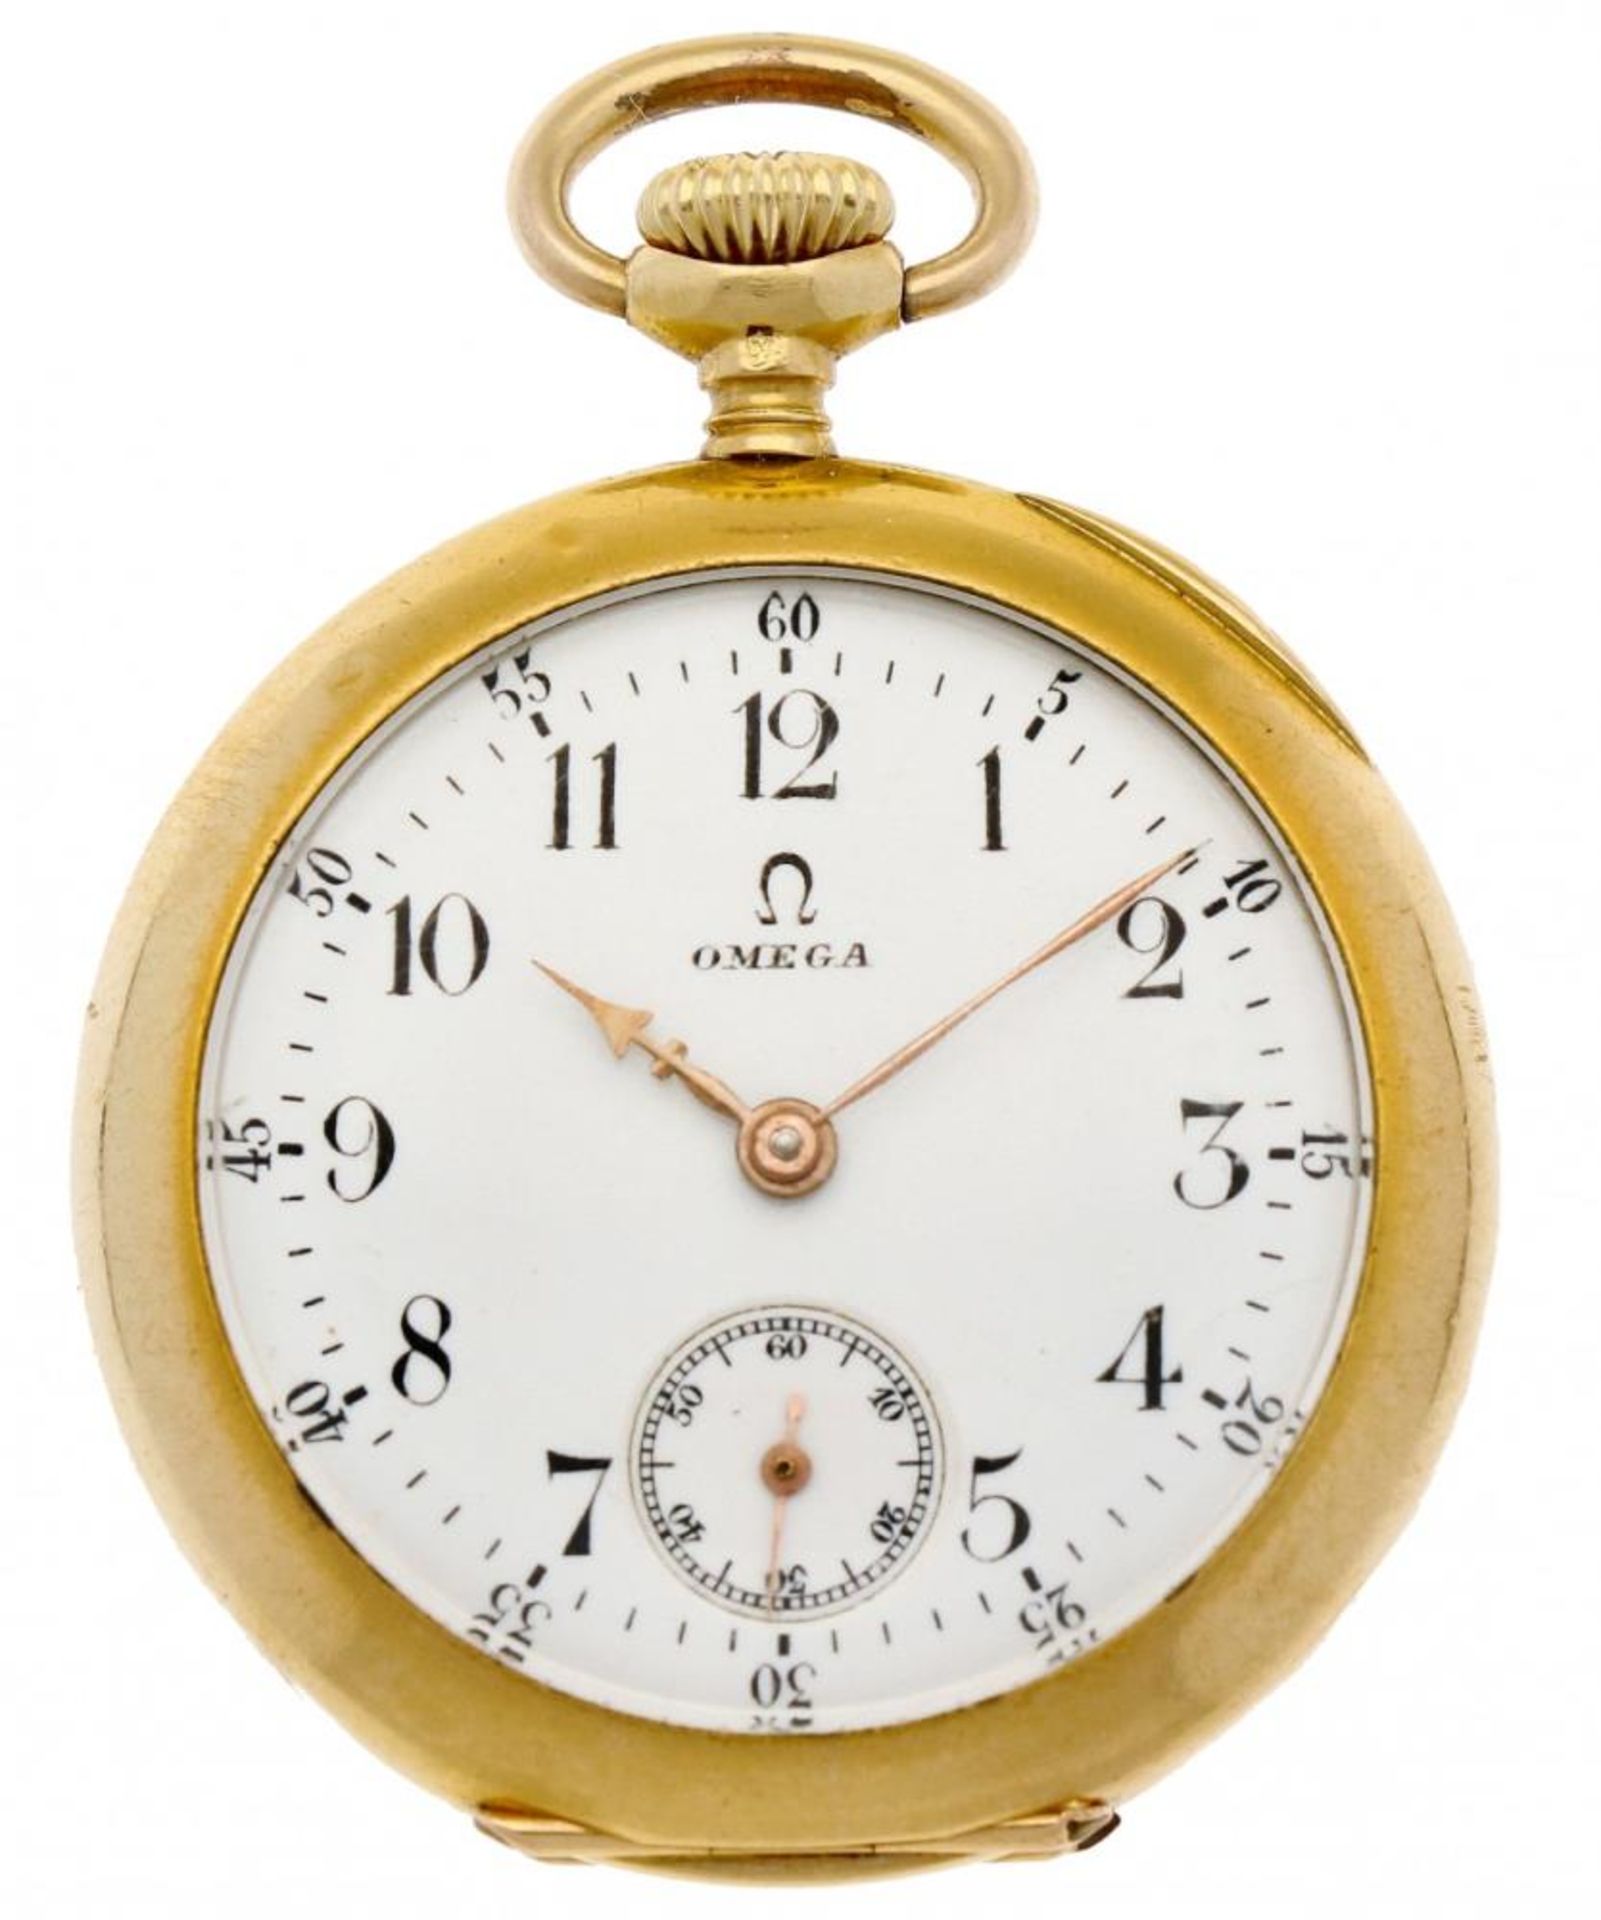 Pocket watch Omega gold - Ladies pocket watch - Manual winding - apprx. 1910.